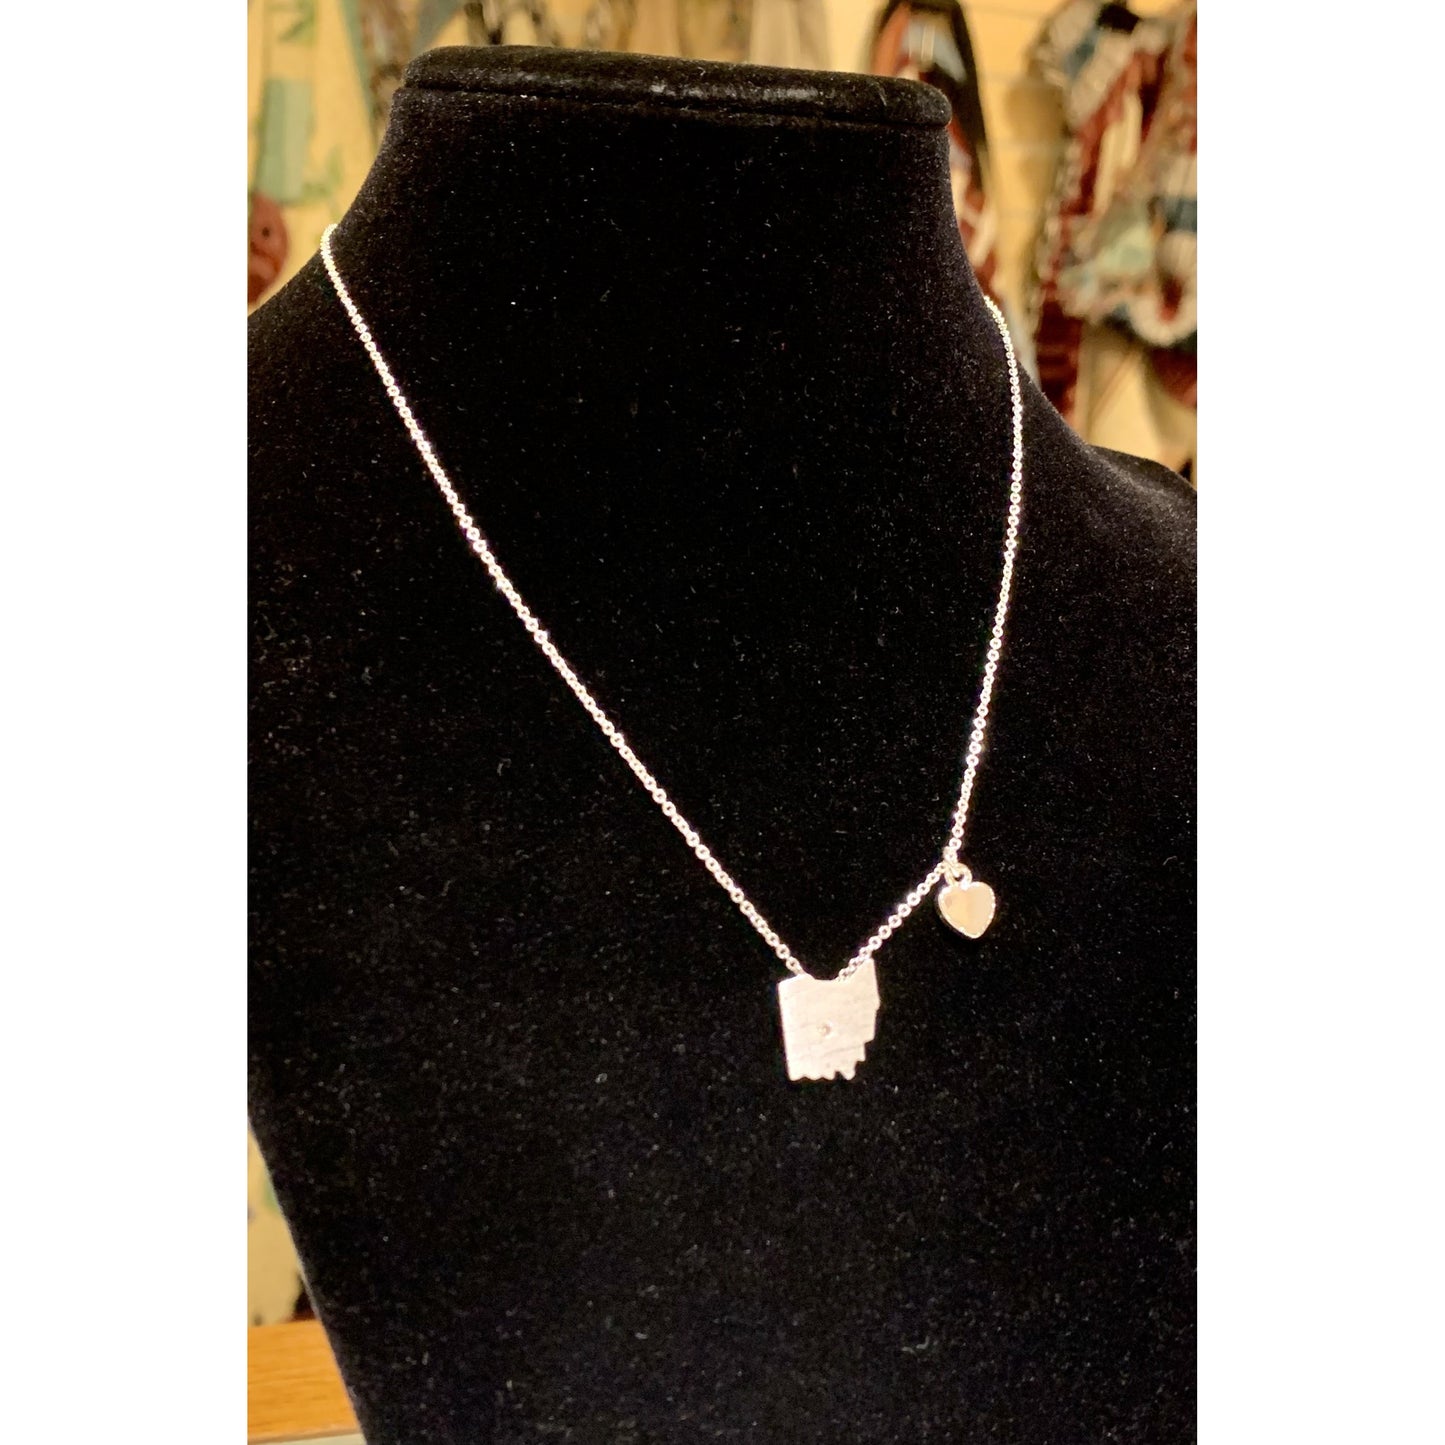 Silver Ohio with Heart Necklace